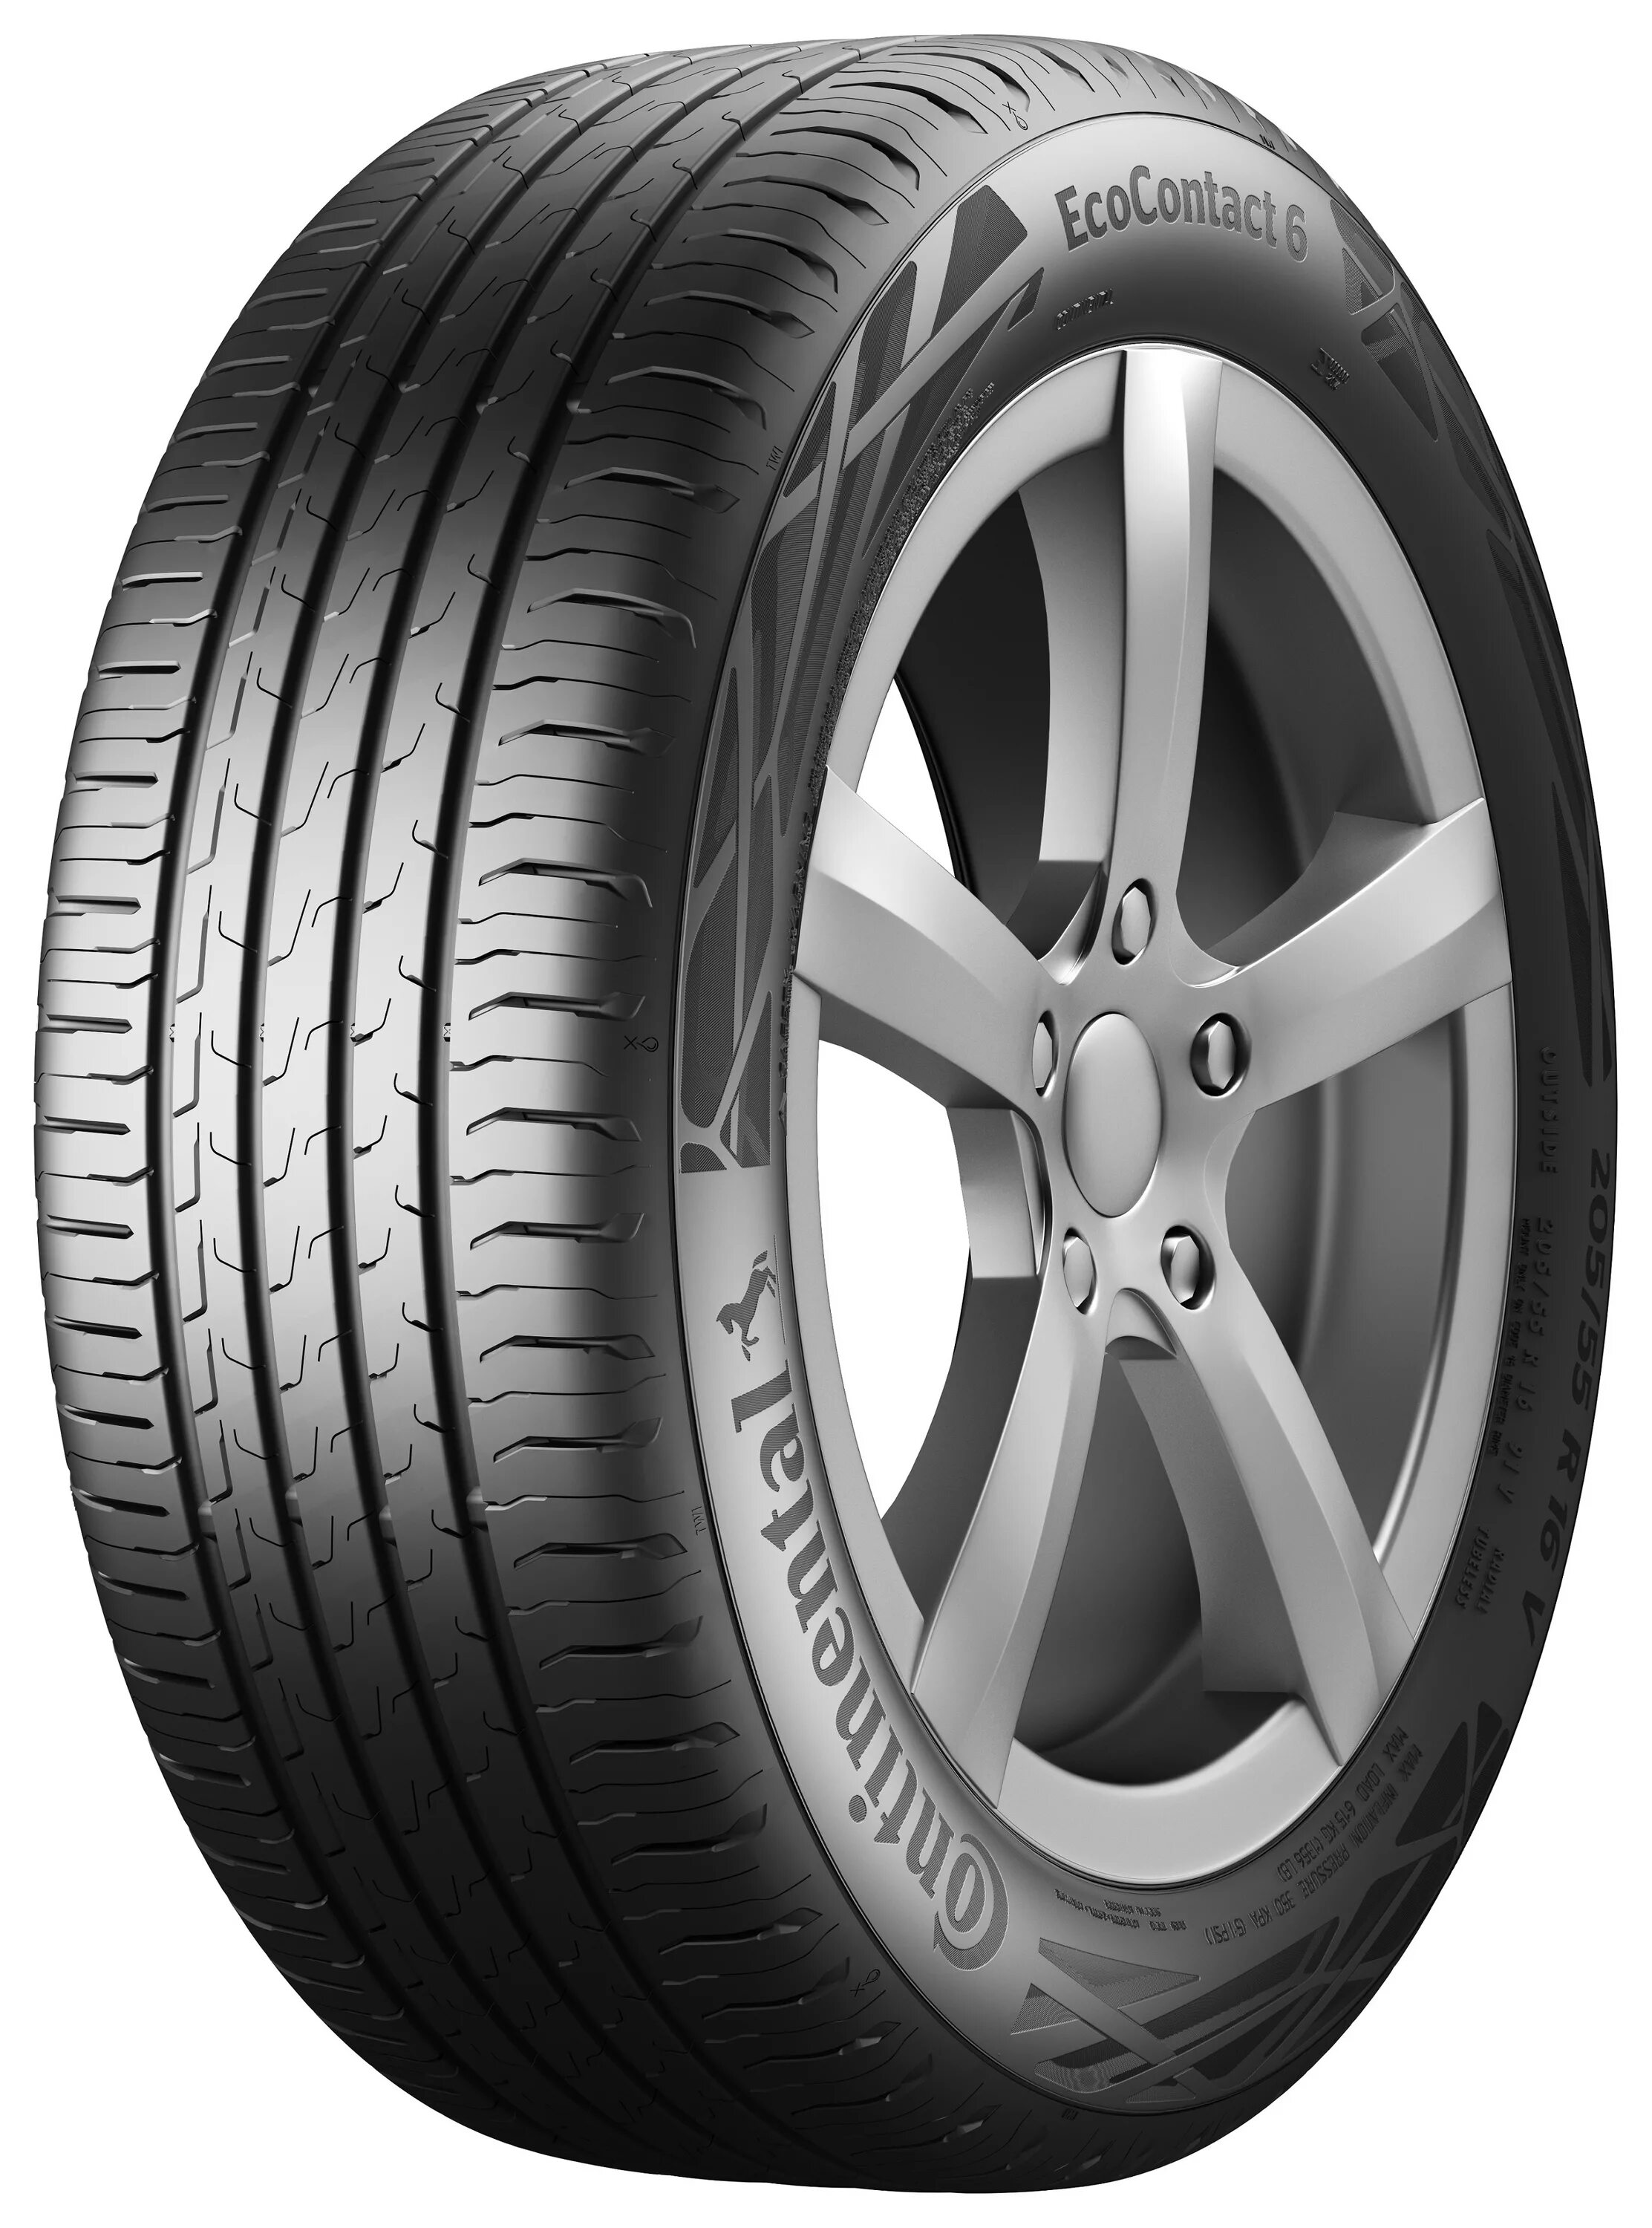 Continental ULTRACONTACT 175/65 r14 82t. Continental CONTIECOCONTACT 6. Continental ECOCONTACT 6 235 55 r18 100v. Шины Continental ECOCONTACT 6.